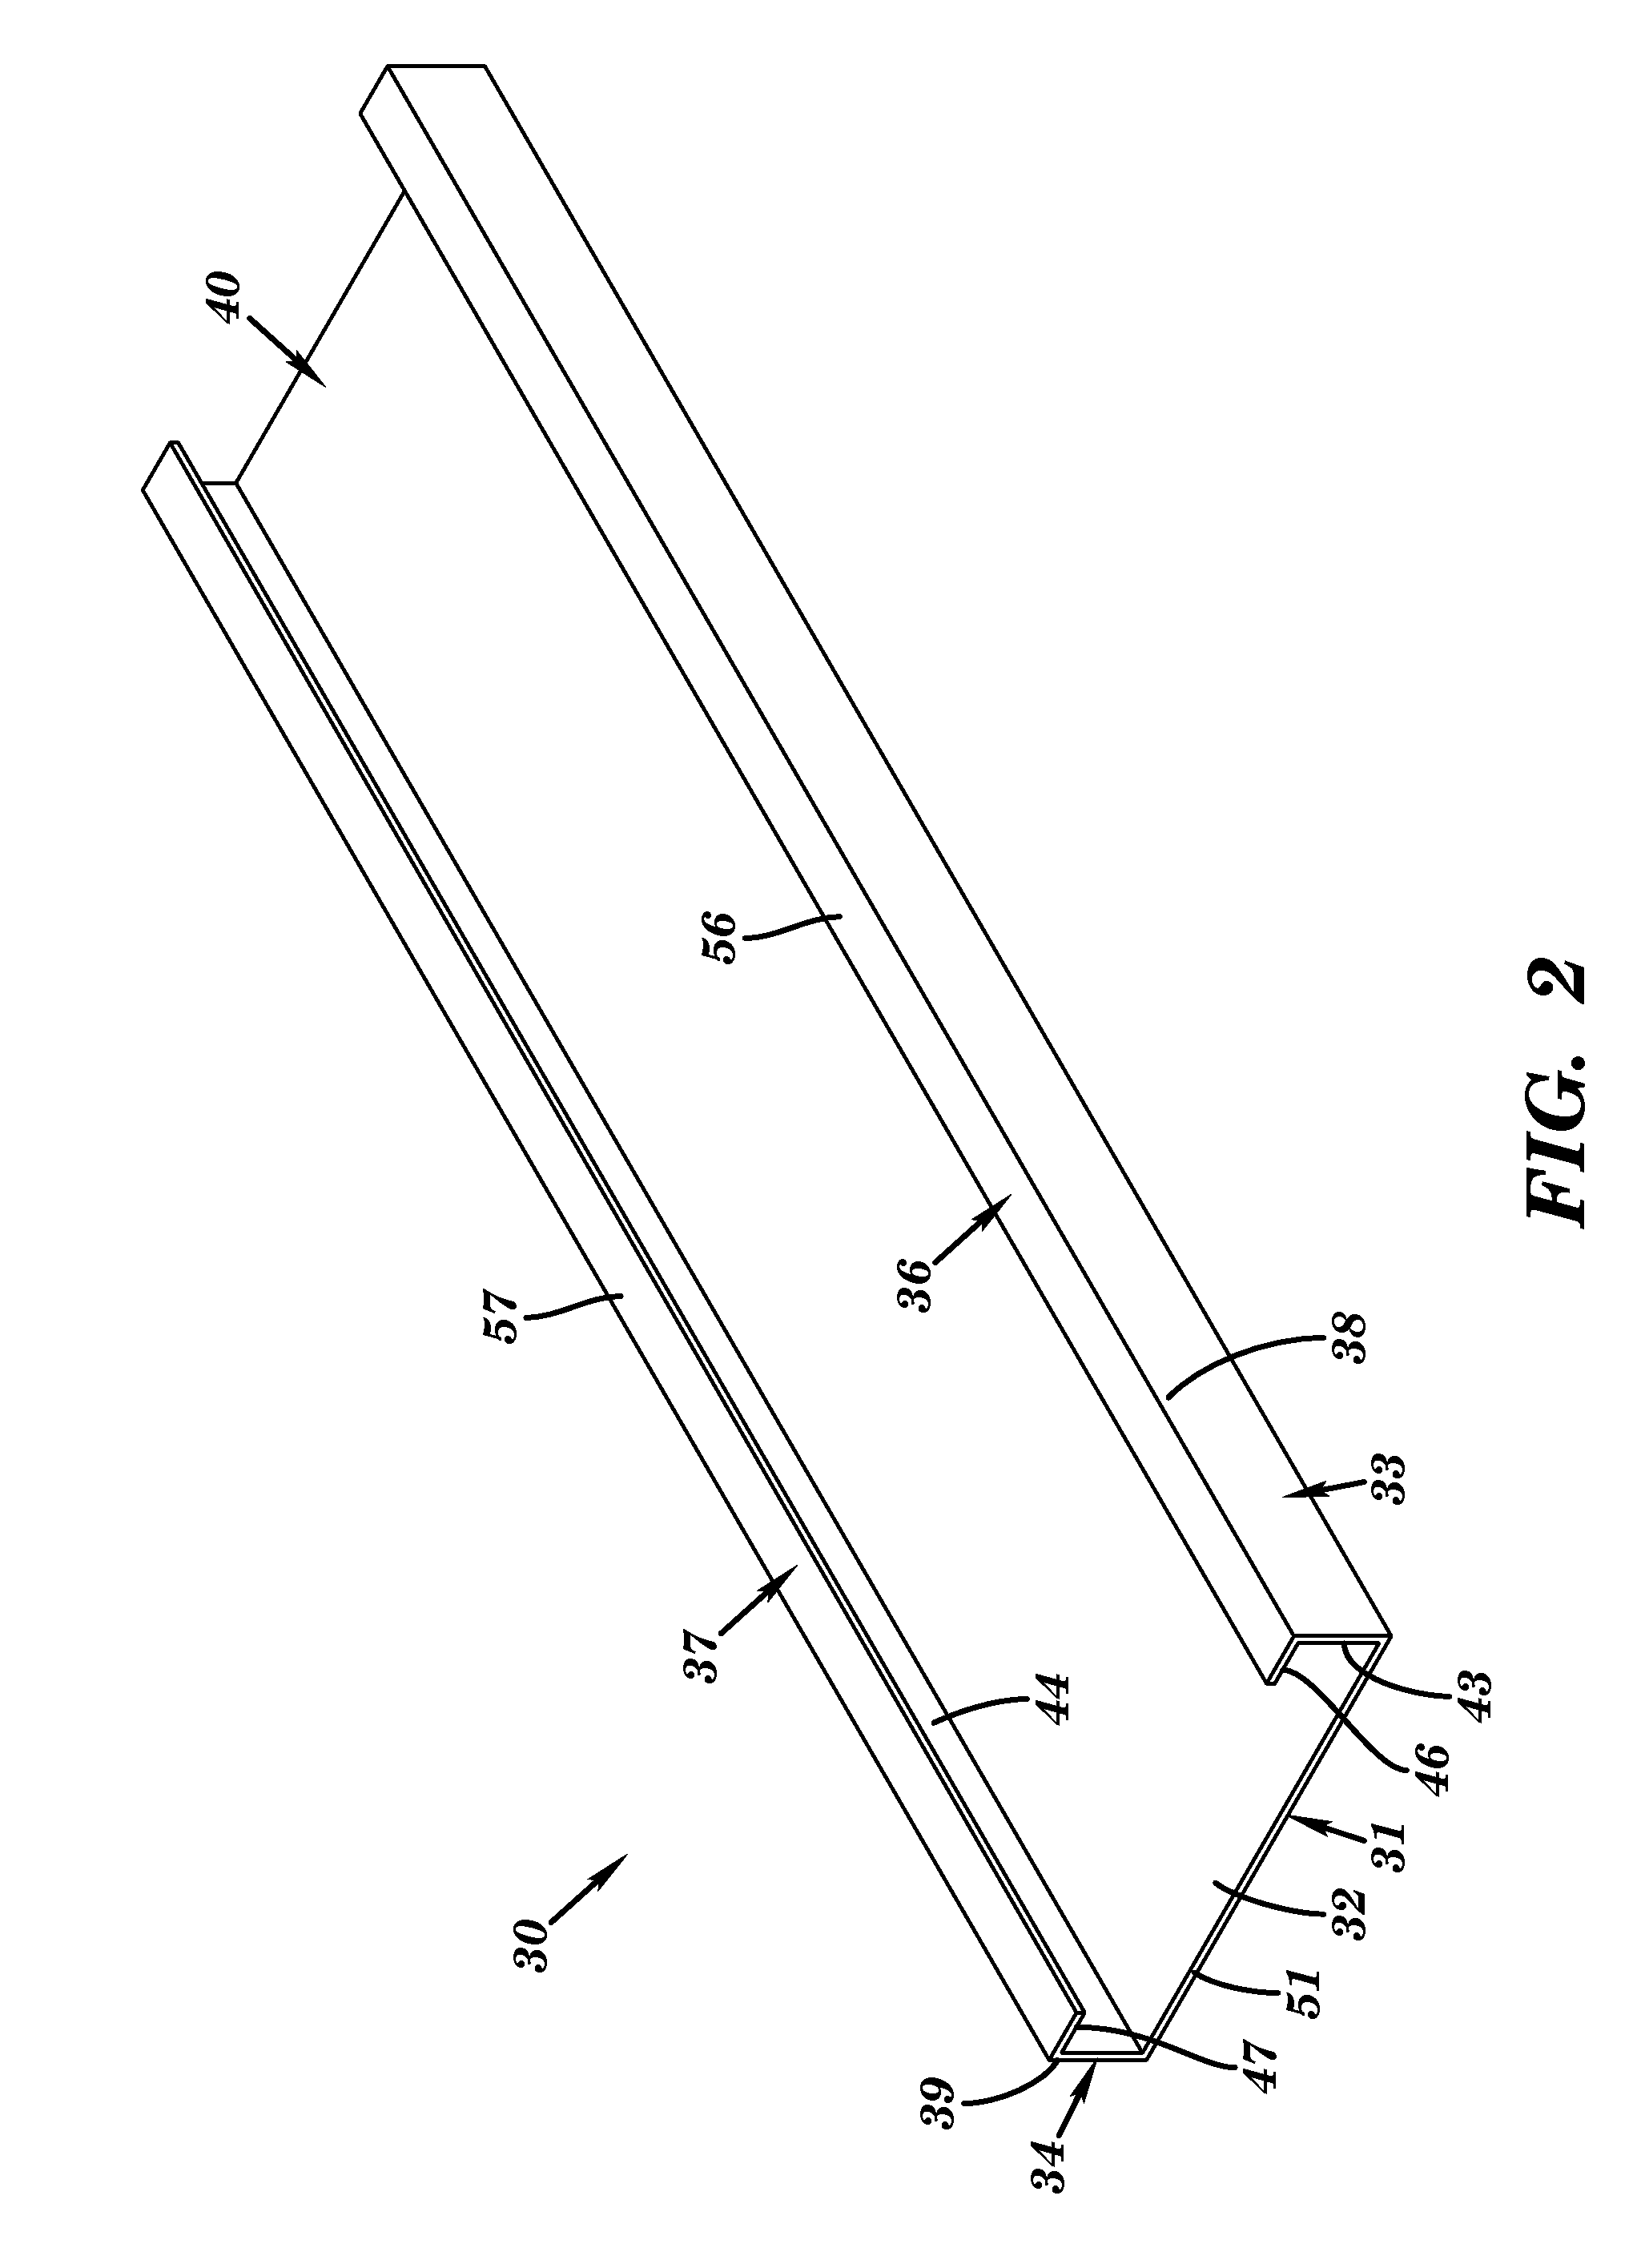 Triple/long jump take-off board systems and methods for forming the same